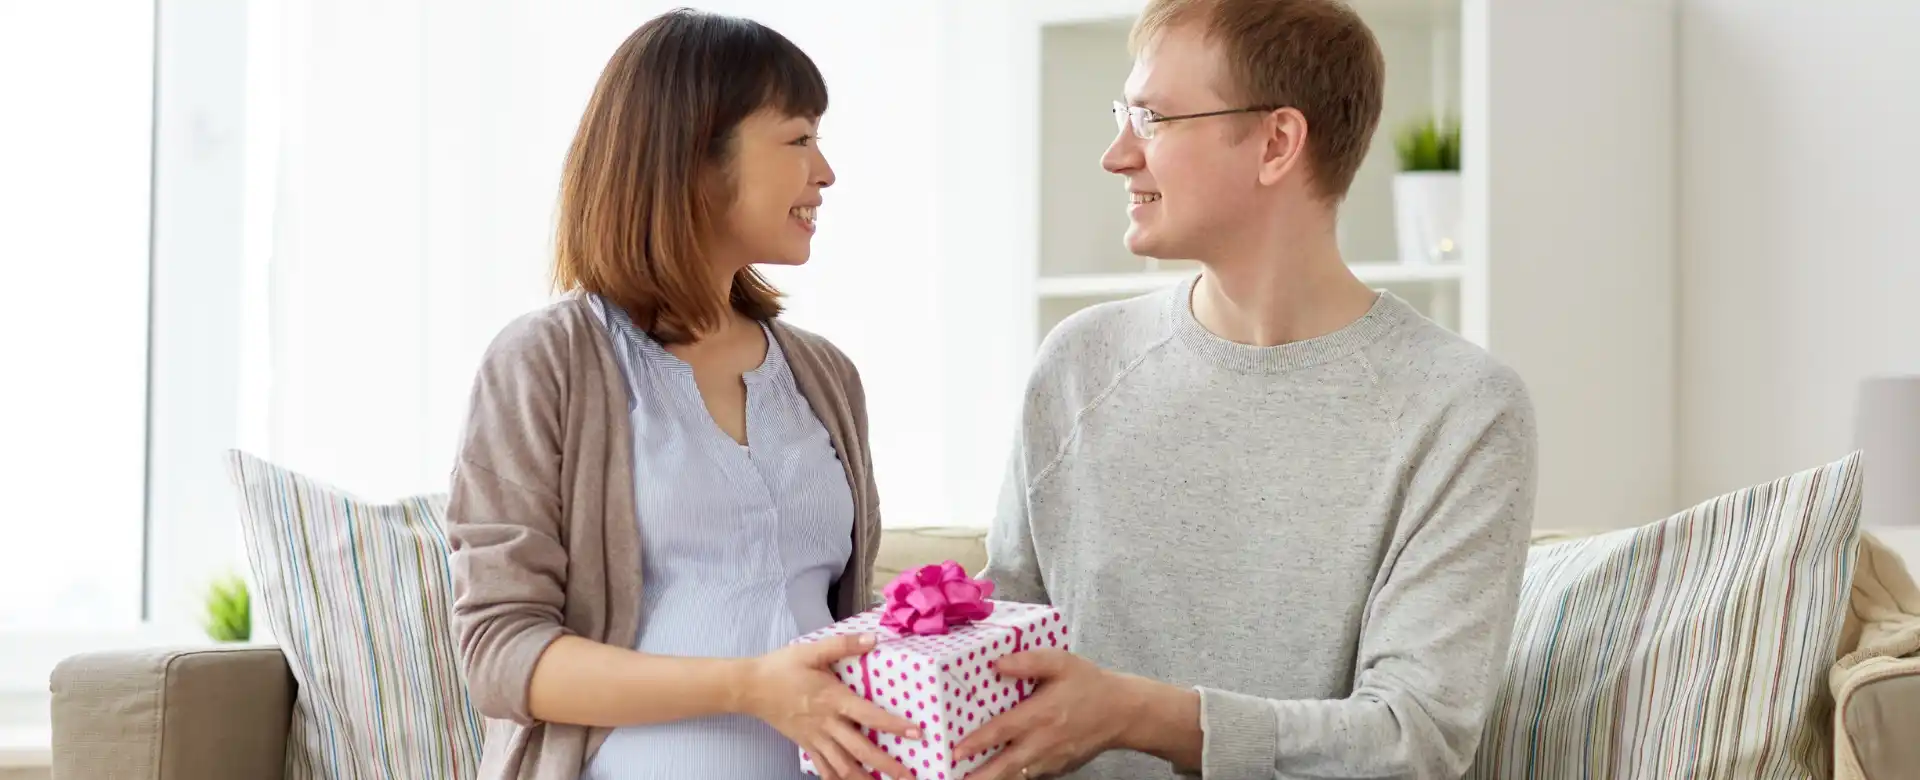 pregnant wife giving husband gift to convince him to find baby gender early